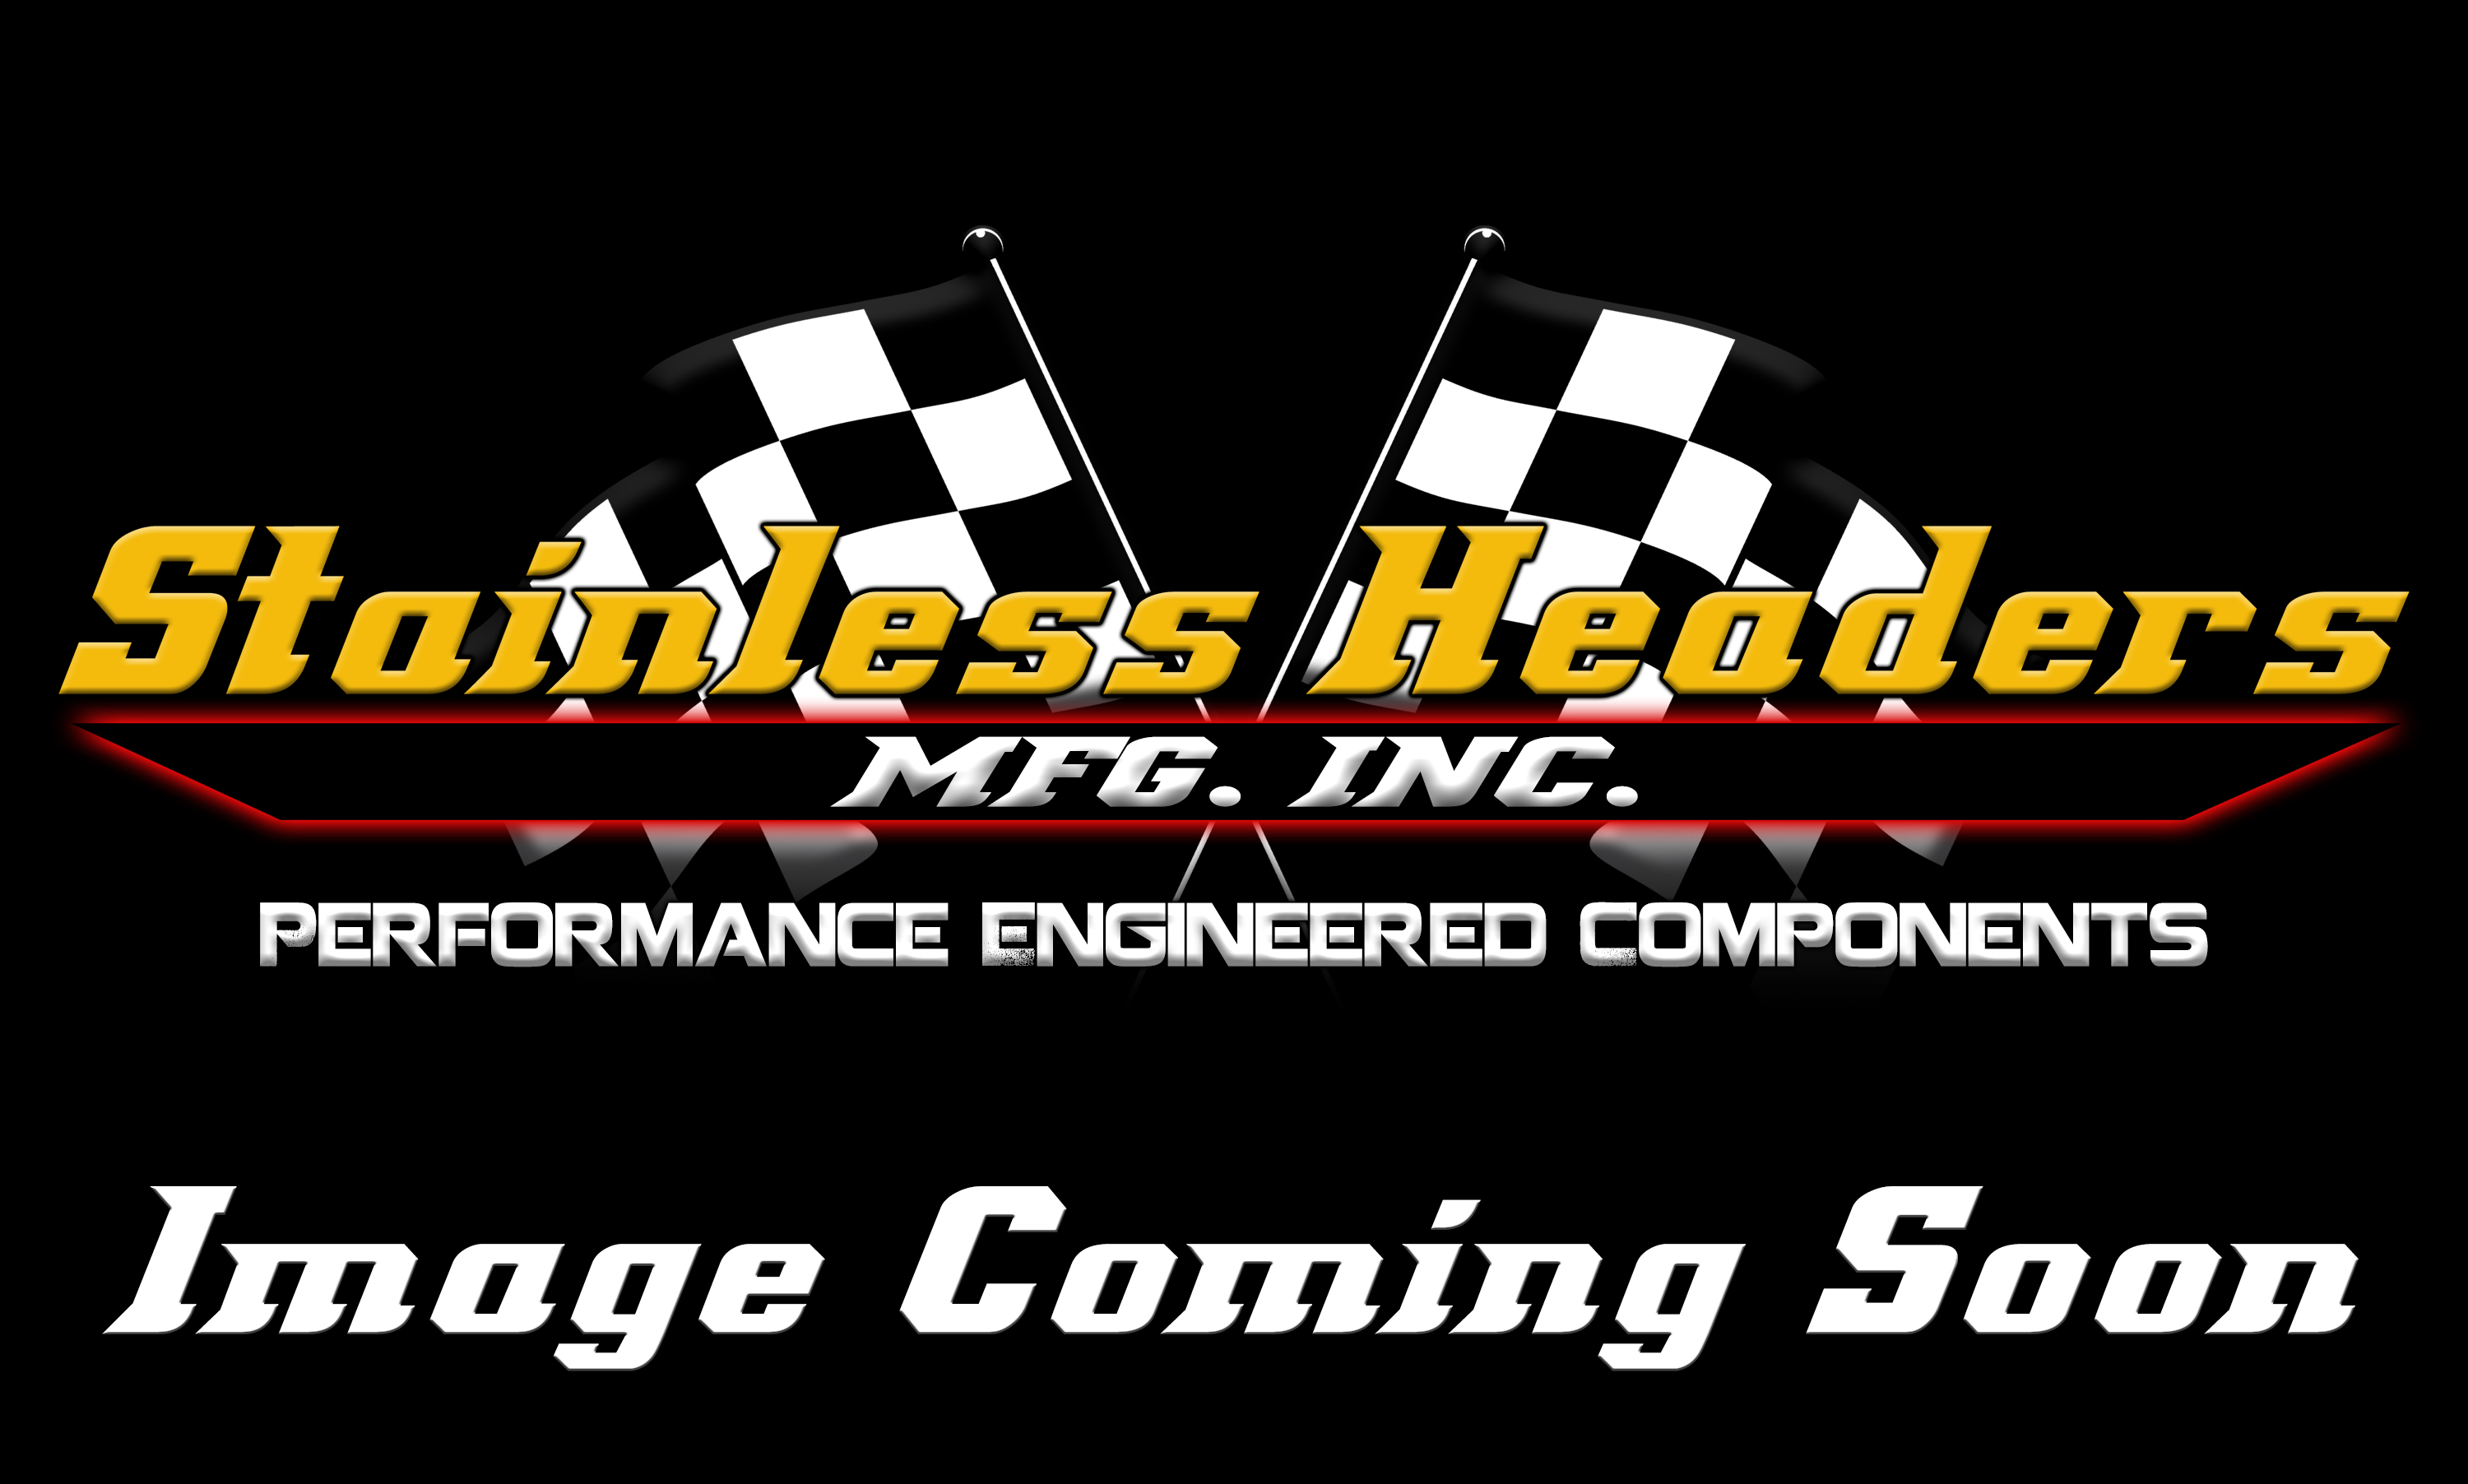 CompTurbo Technology Turbochargers - Comp Turbo Journal Bearing Turbochargers - CompTurbo Technologies - CTR3893S-6767 360 Journal Bearing Turbocharger (1000 HP)